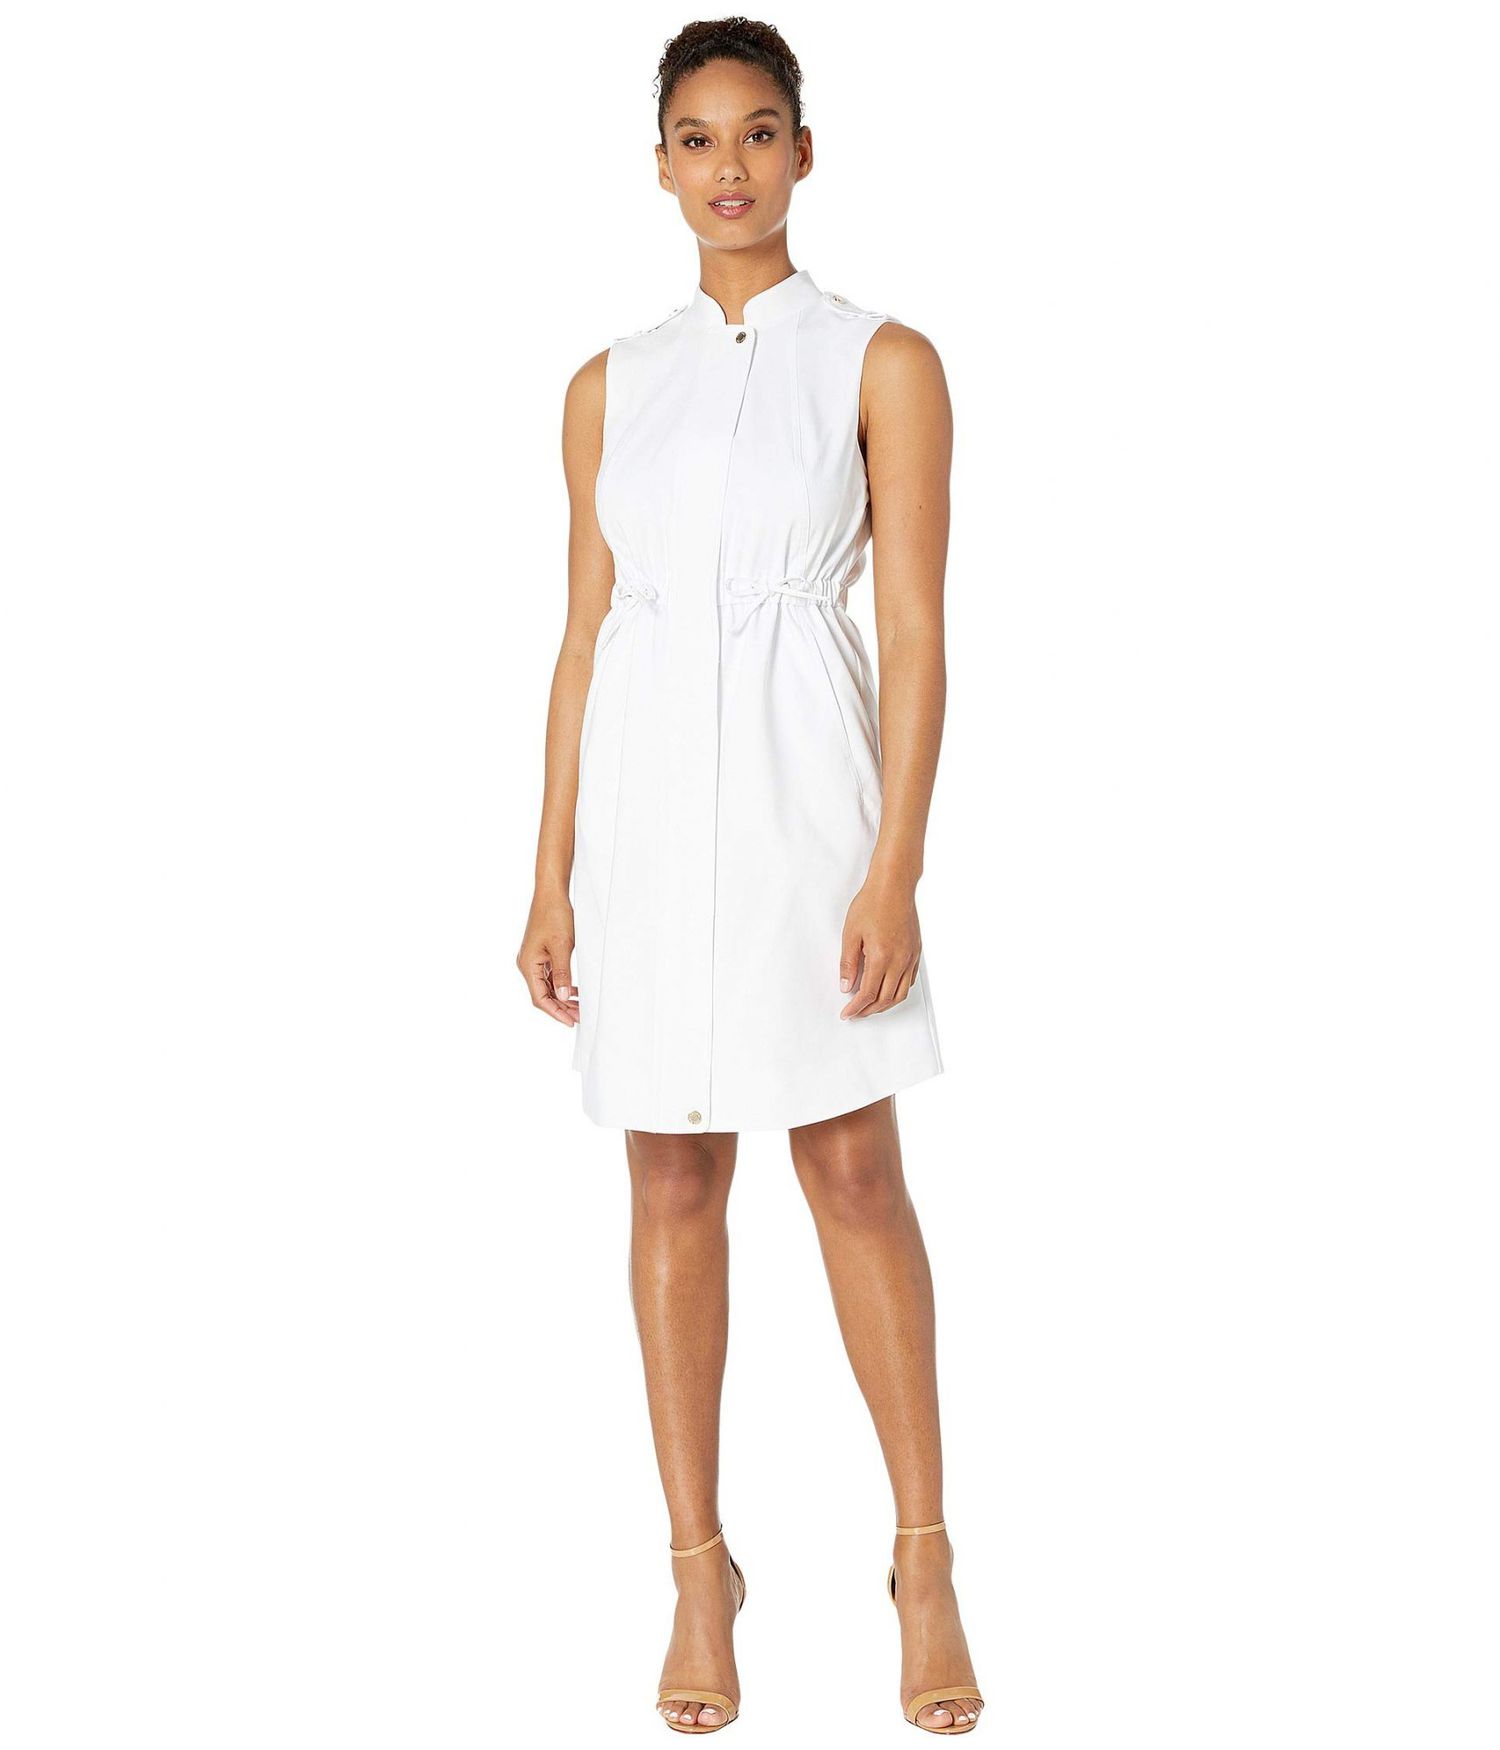 Meghan Markle’s White Trench Dress: Get the Look | PEOPLE.com